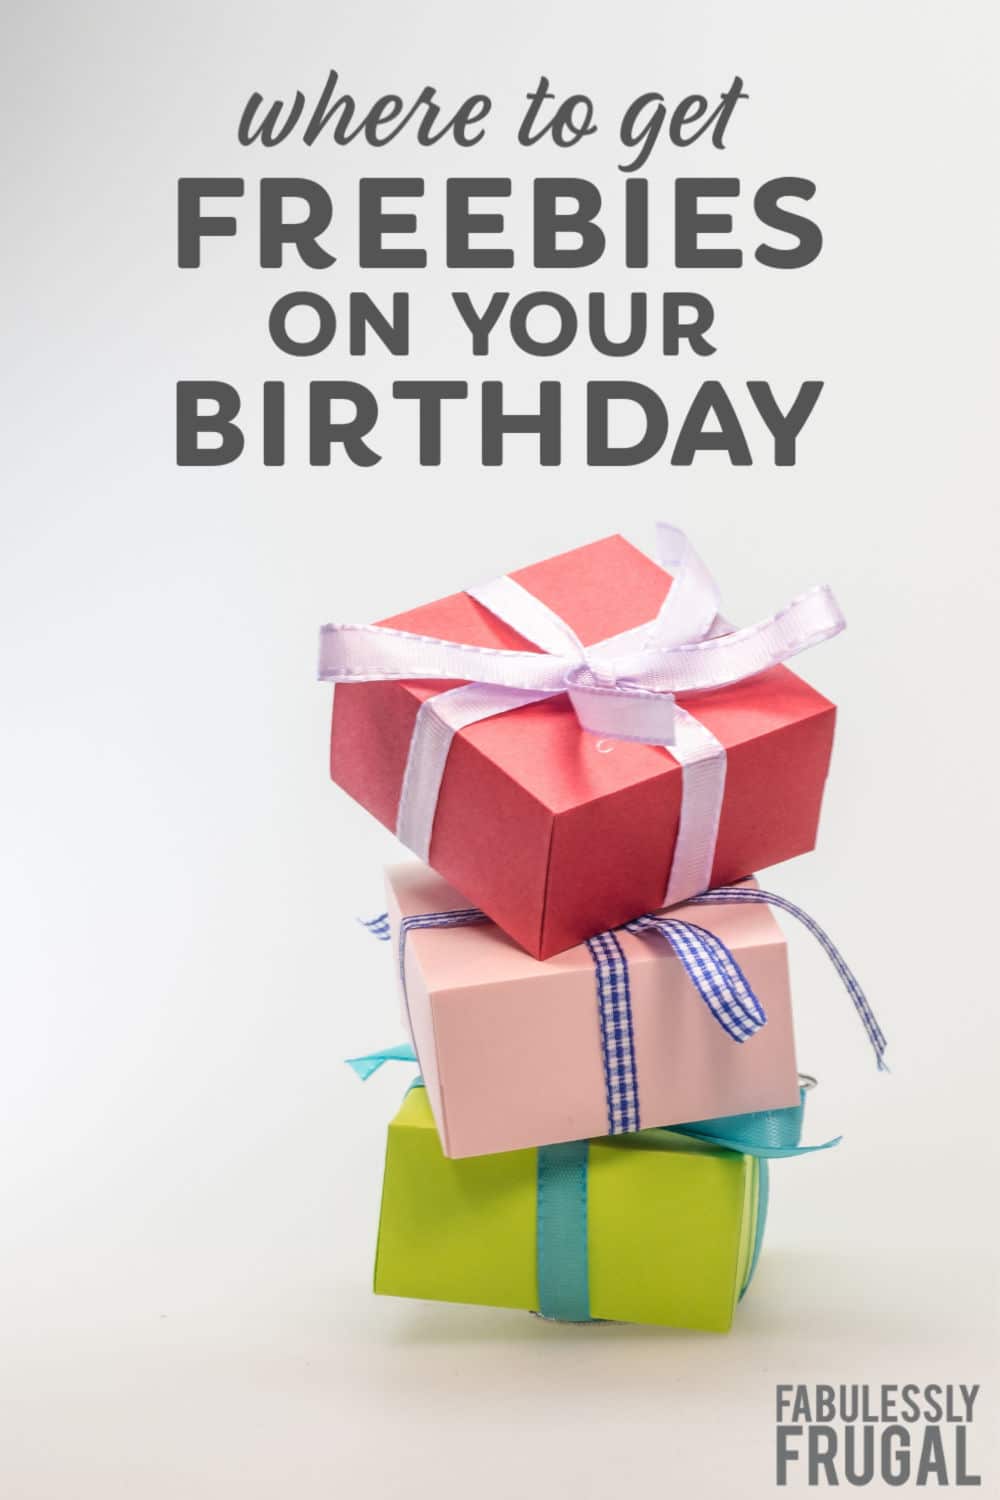 Where to get freebies on your birthday